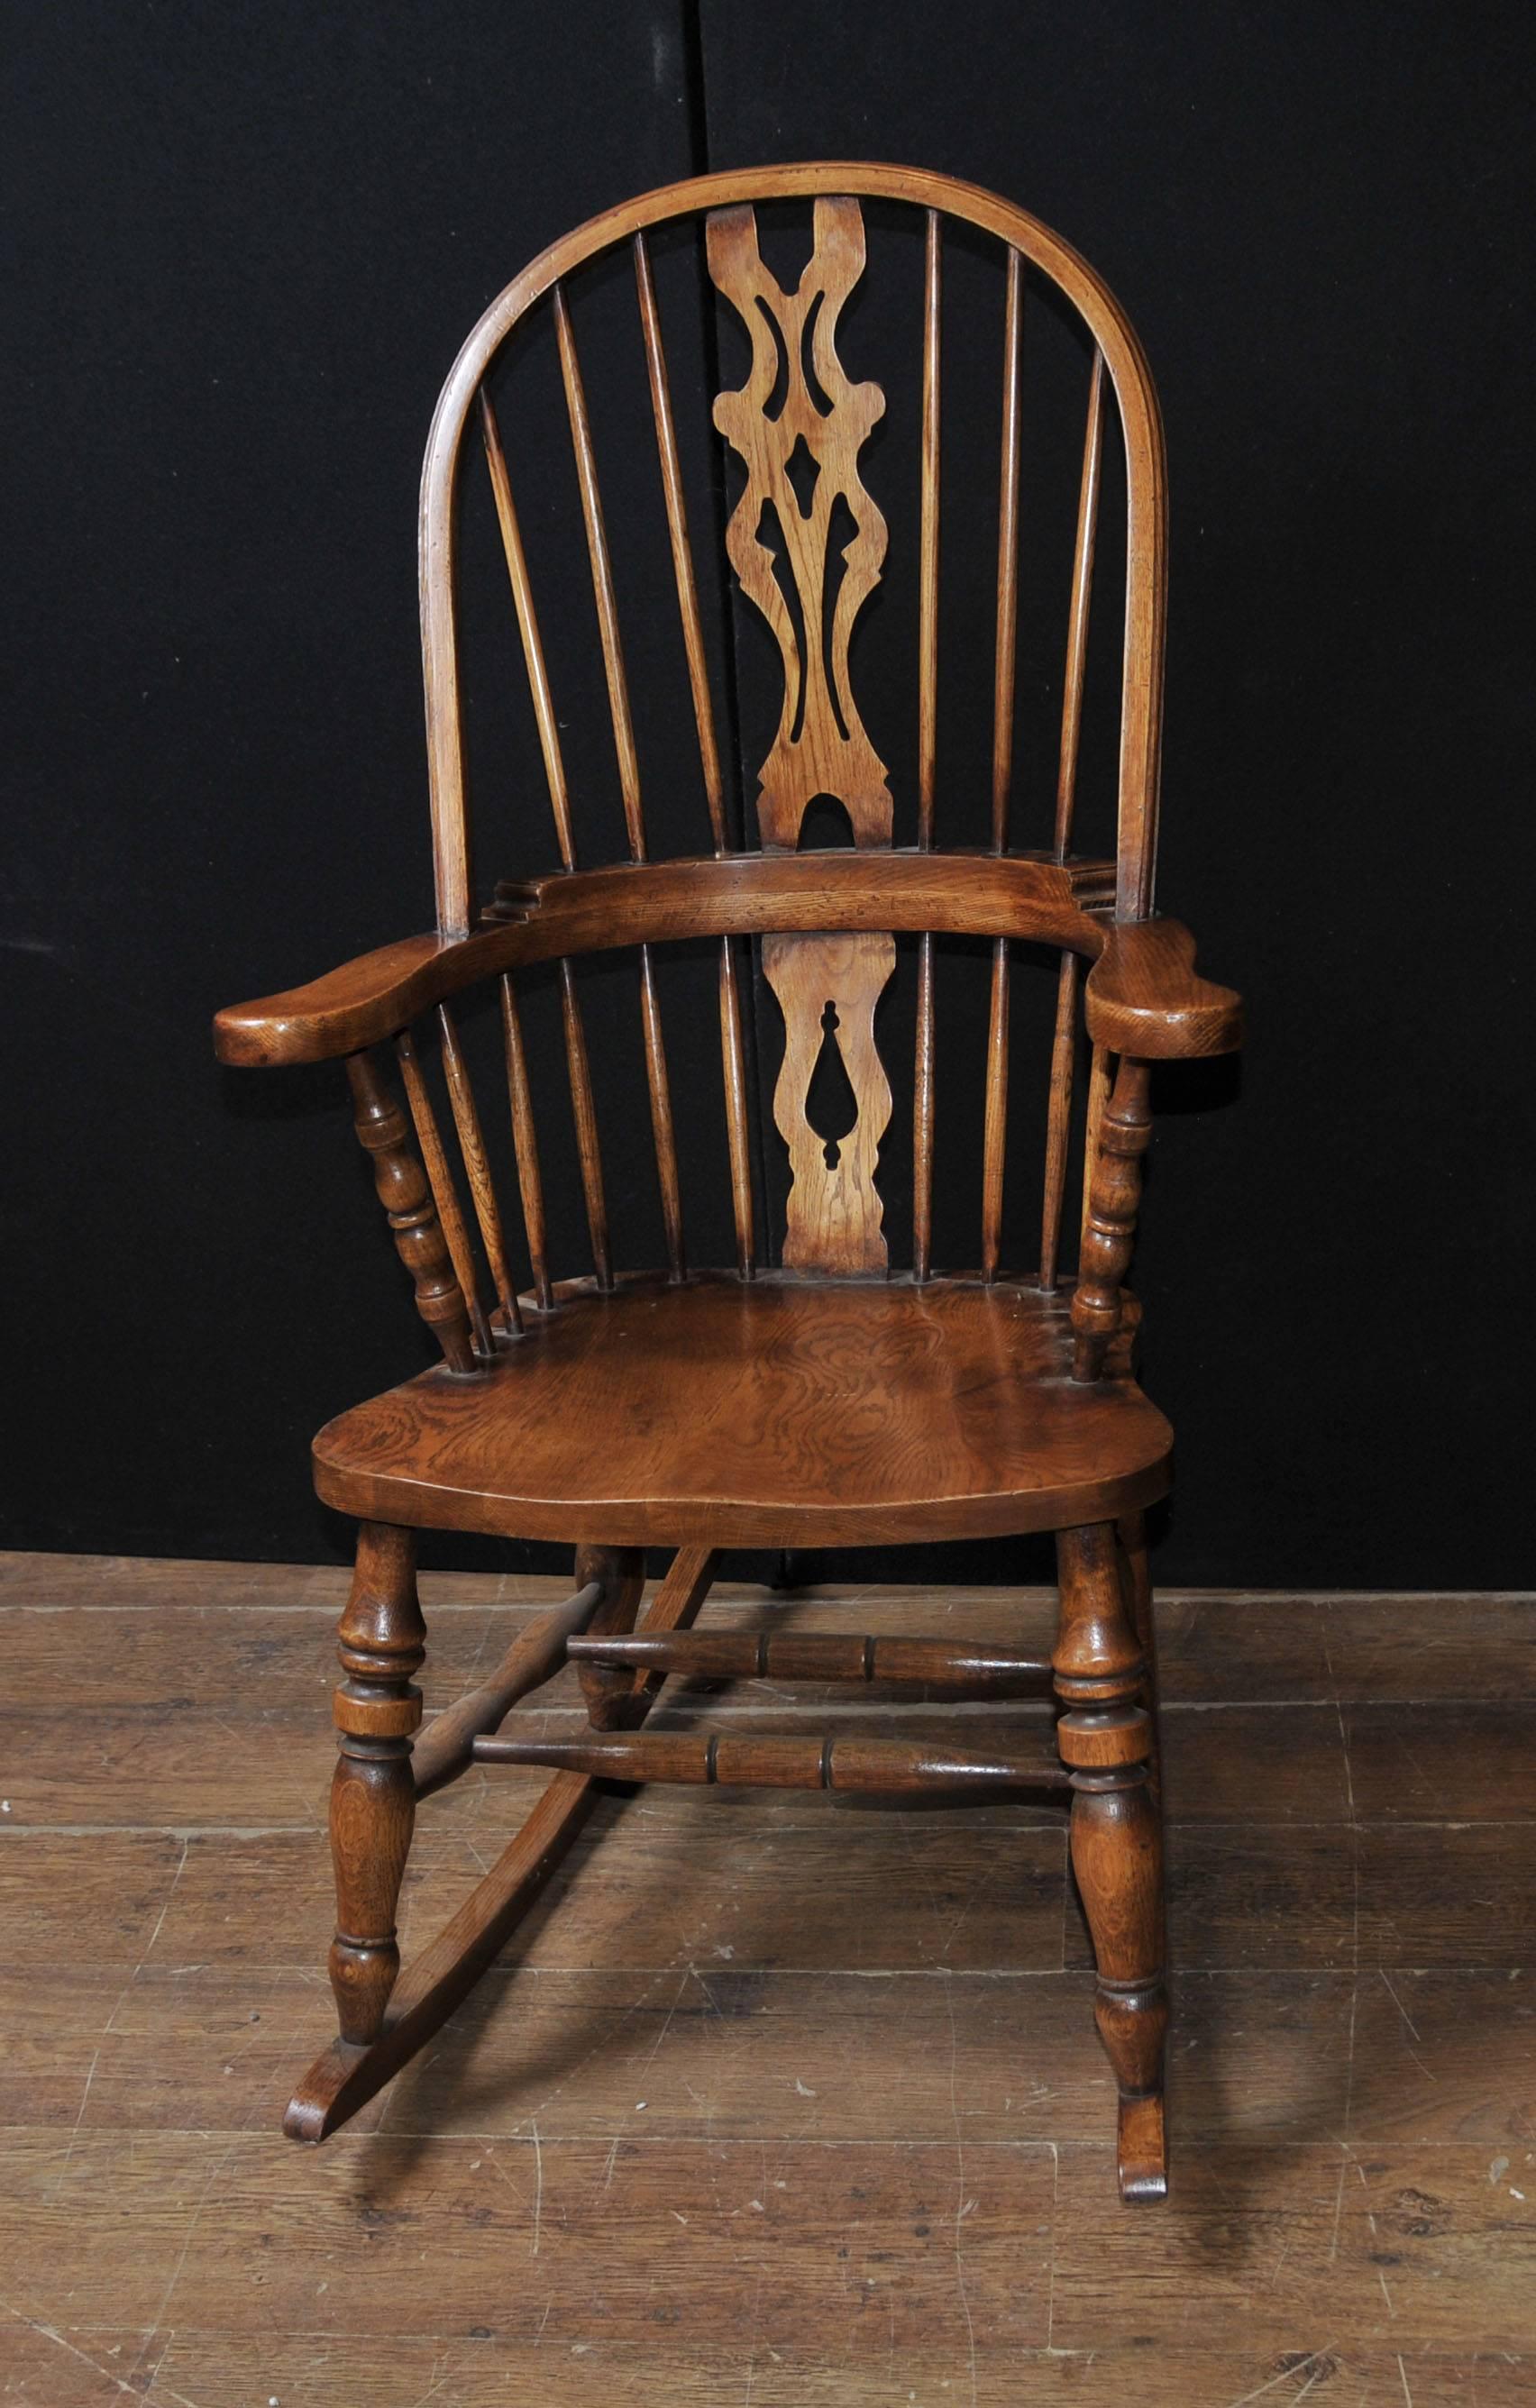 You are viewing a gorgeous hand-carved English Windsor rocking chair. The Windsor chair is a perennial favourite so imagine my delight to find a unique rocking chair version of it on a recent buying trip in Norfolk! The chair has been handcrafted